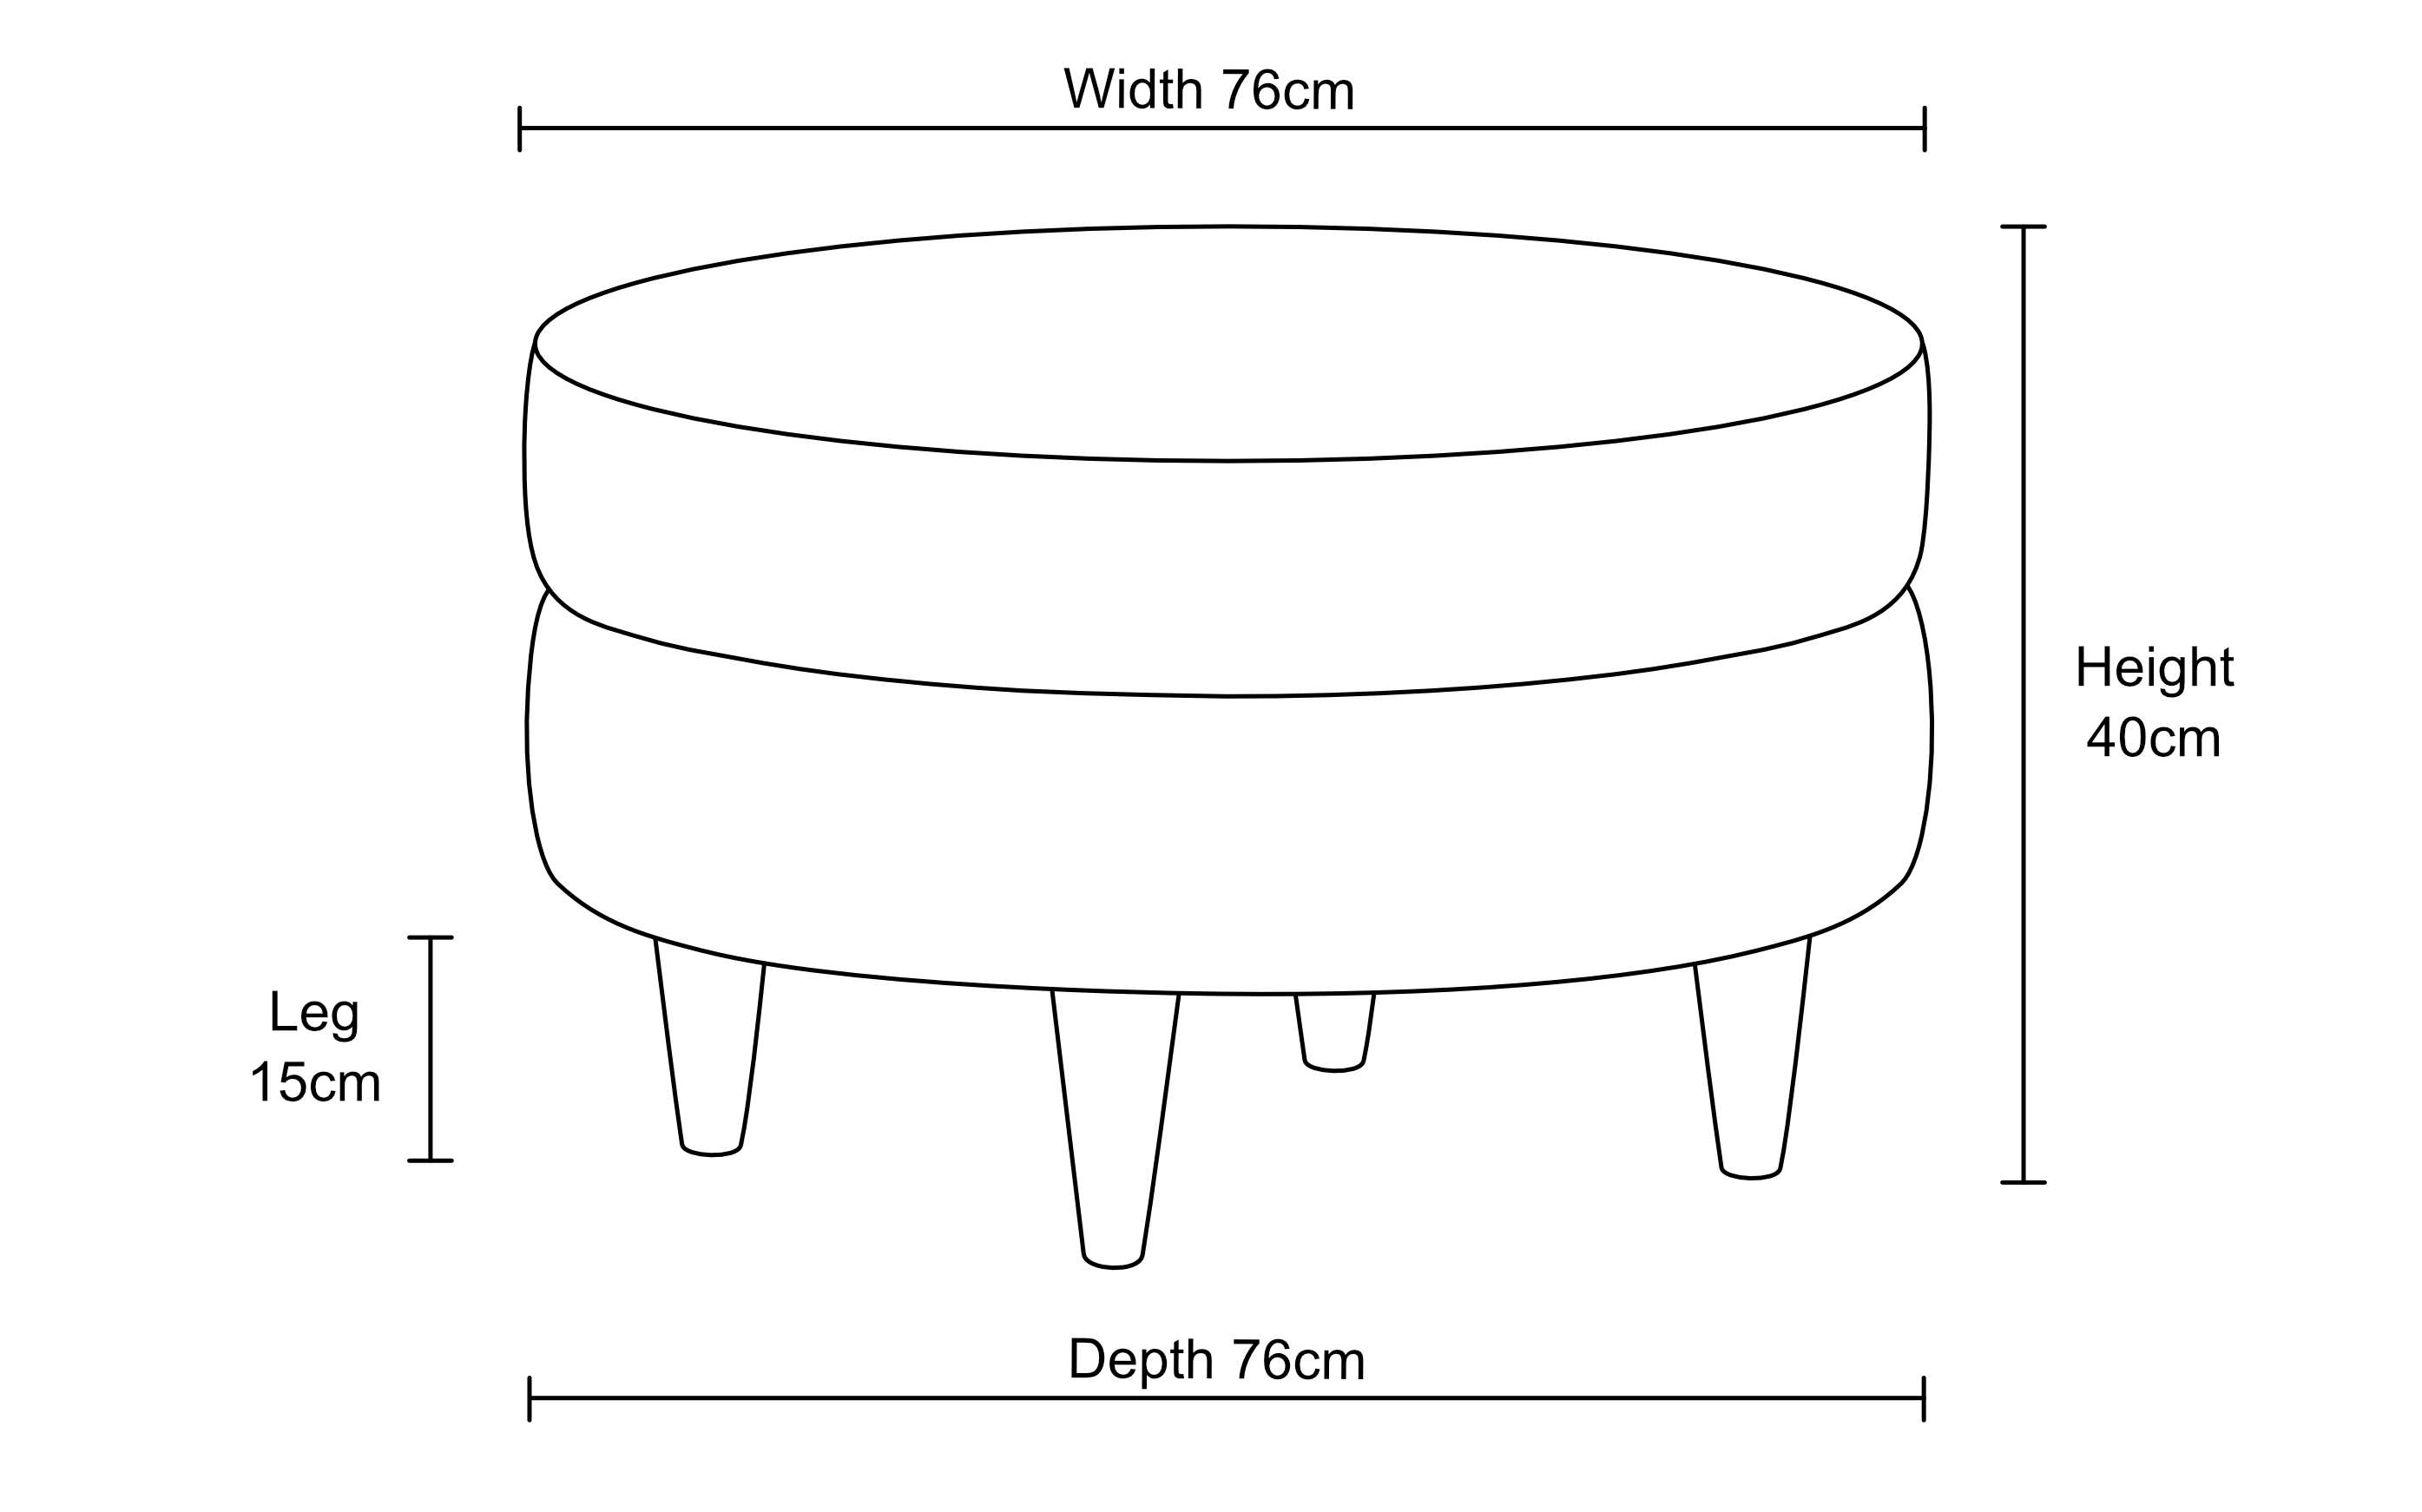 https://www.footstools.co.uk/wp-content/uploads/round-footstool-30x30-dimensions-4.jpg